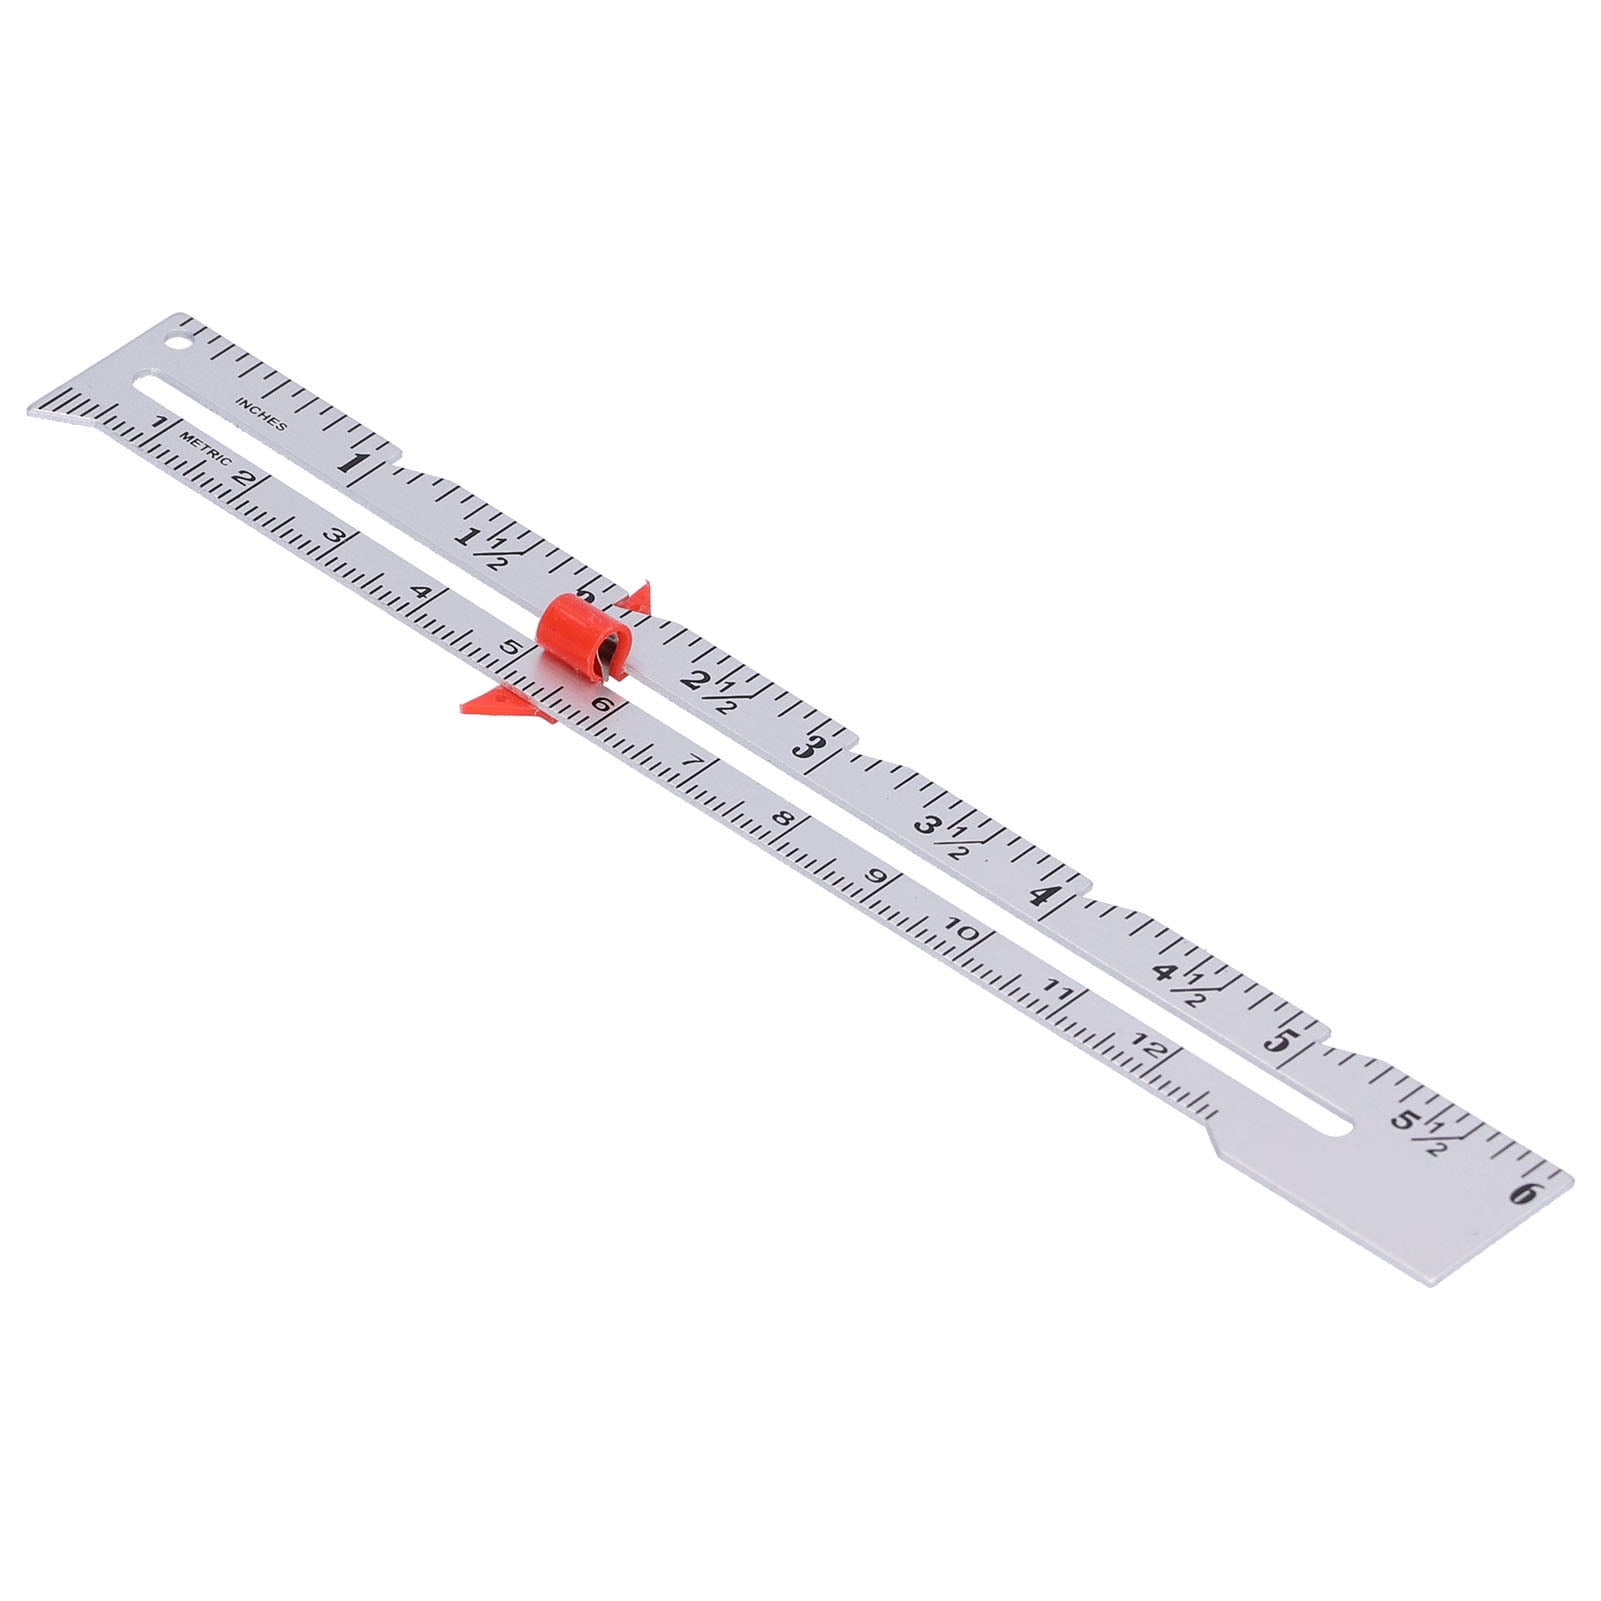  Sewing Gauge Sewing Measuring Tool Sewing Rulers for  Sewing,Crafting, Marking Button Holes,Hem Gauge, Circle Compass, T Gauge  Sewing Tools(Blue) : Arts, Crafts & Sewing